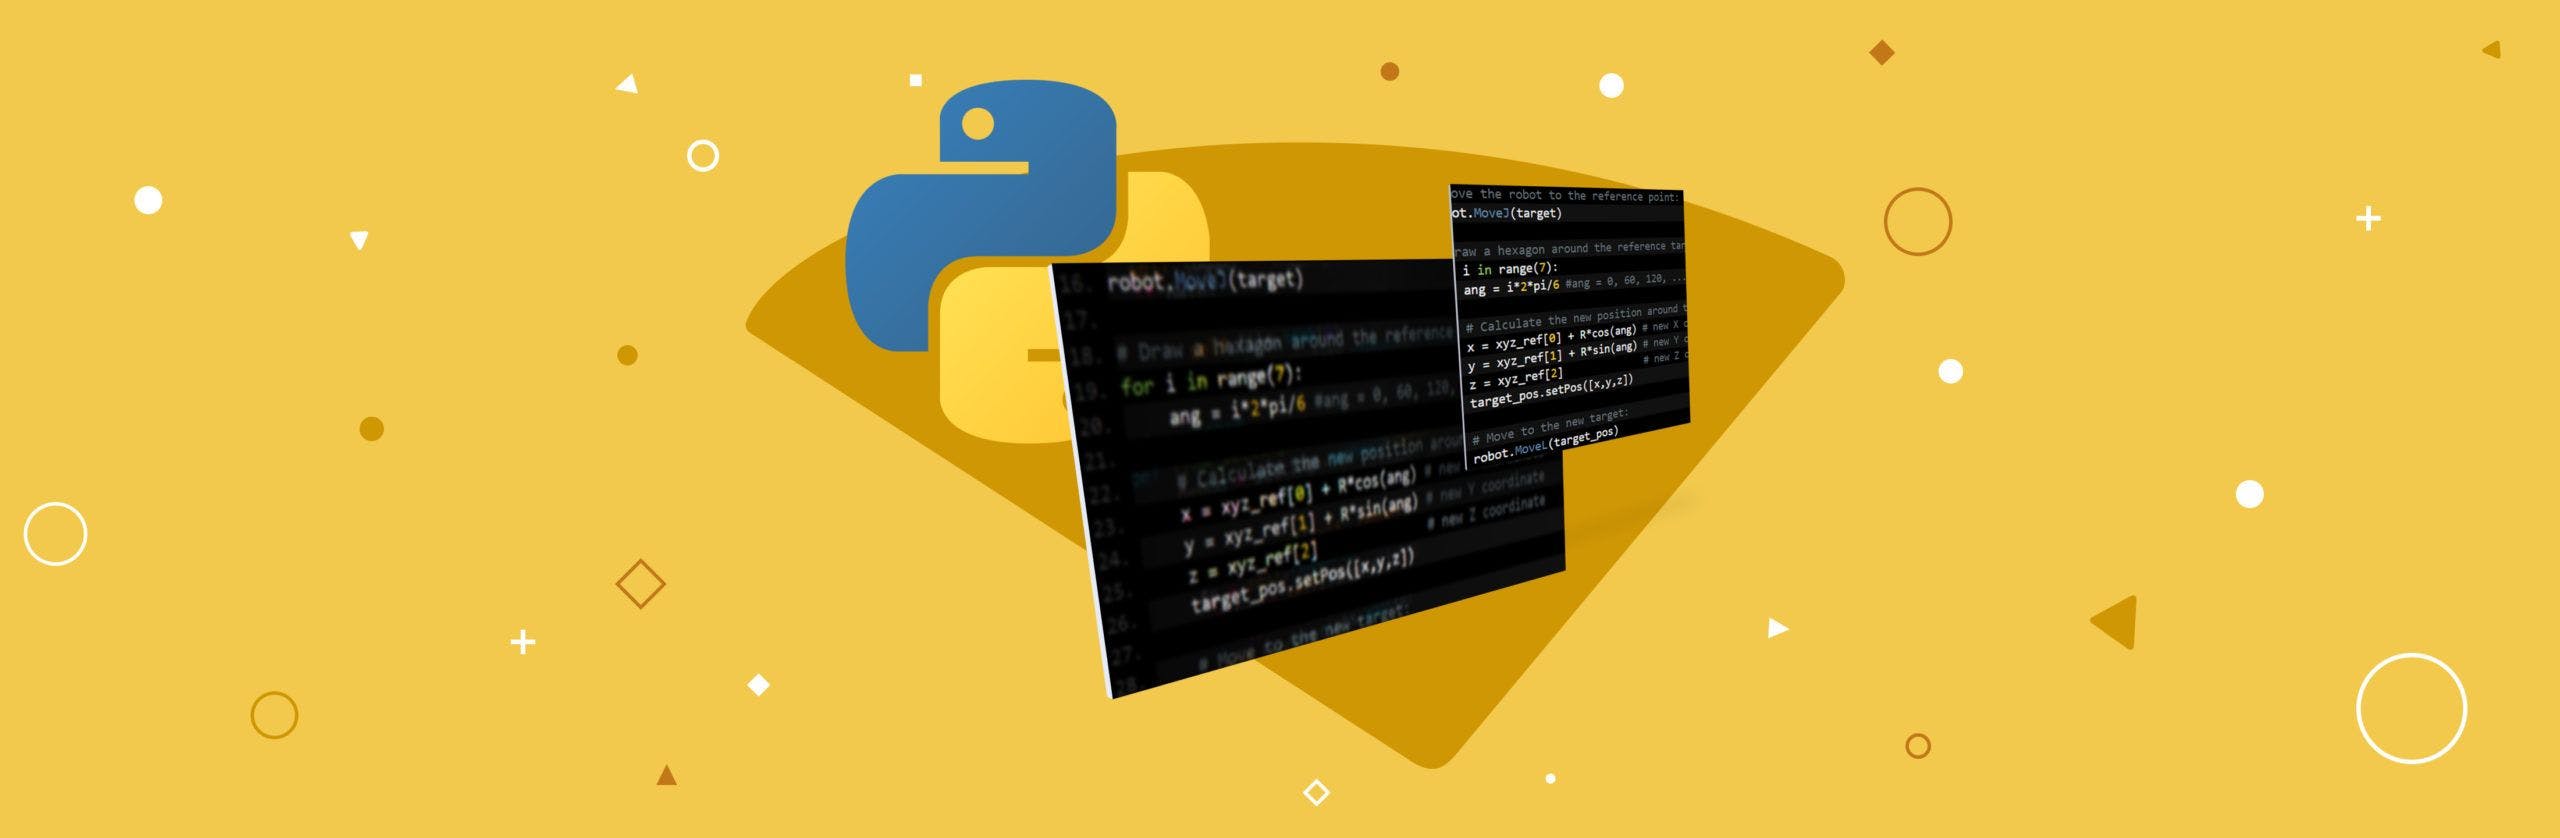 featured image - Top 6 Integrated Development Environments (IDE) for Python Programmers